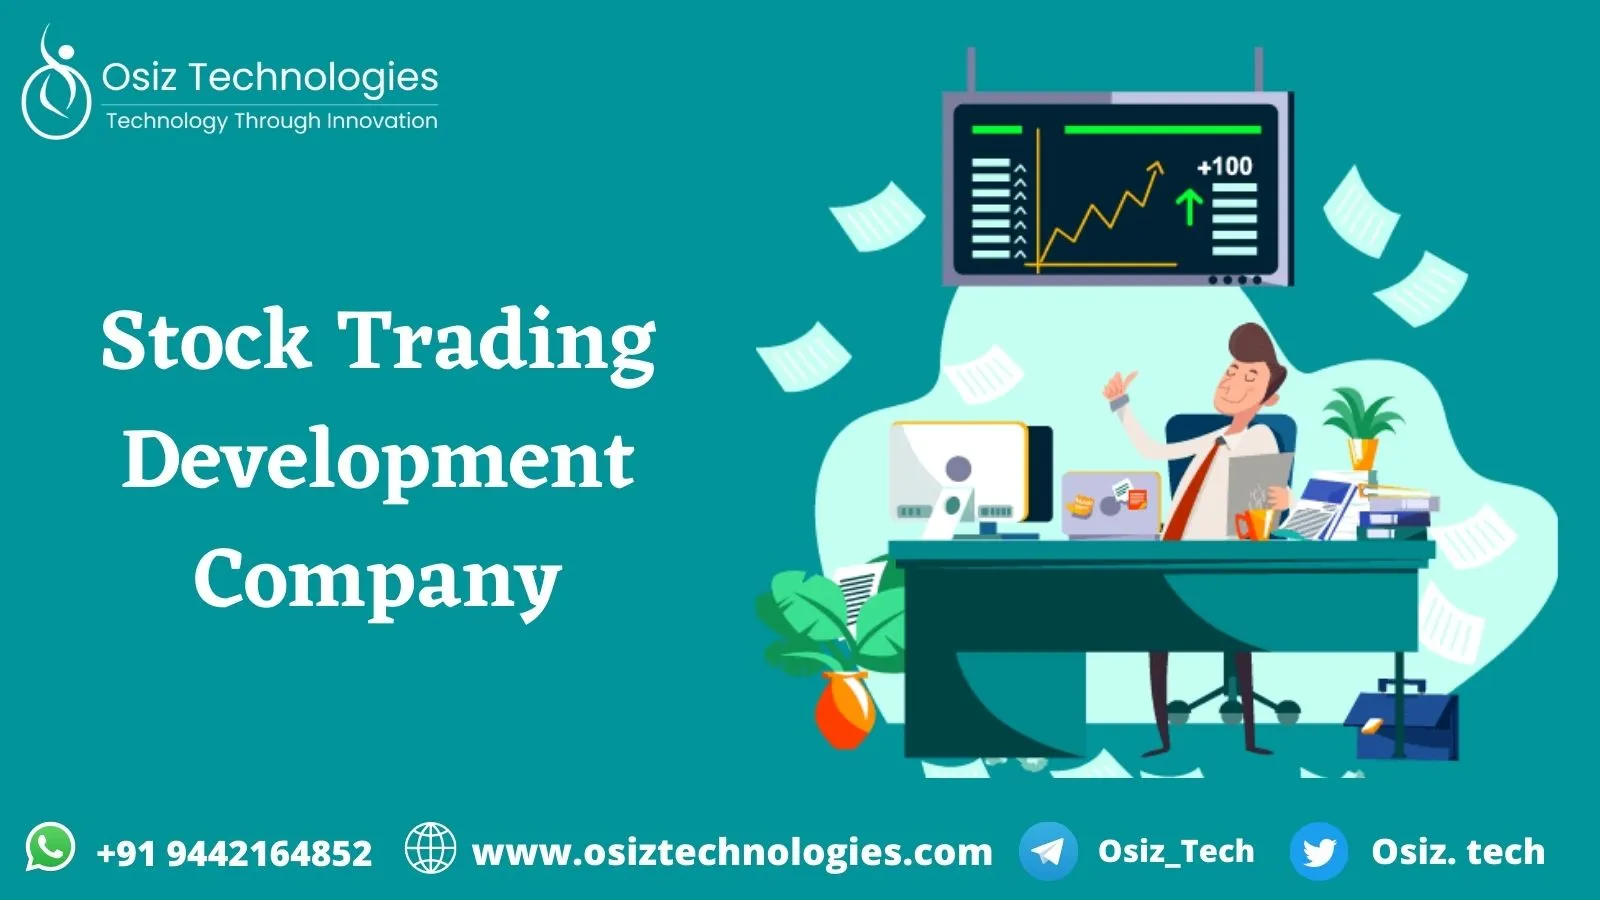 Why Stock Trading Platform Development Is Fast Becoming the Trend 2023